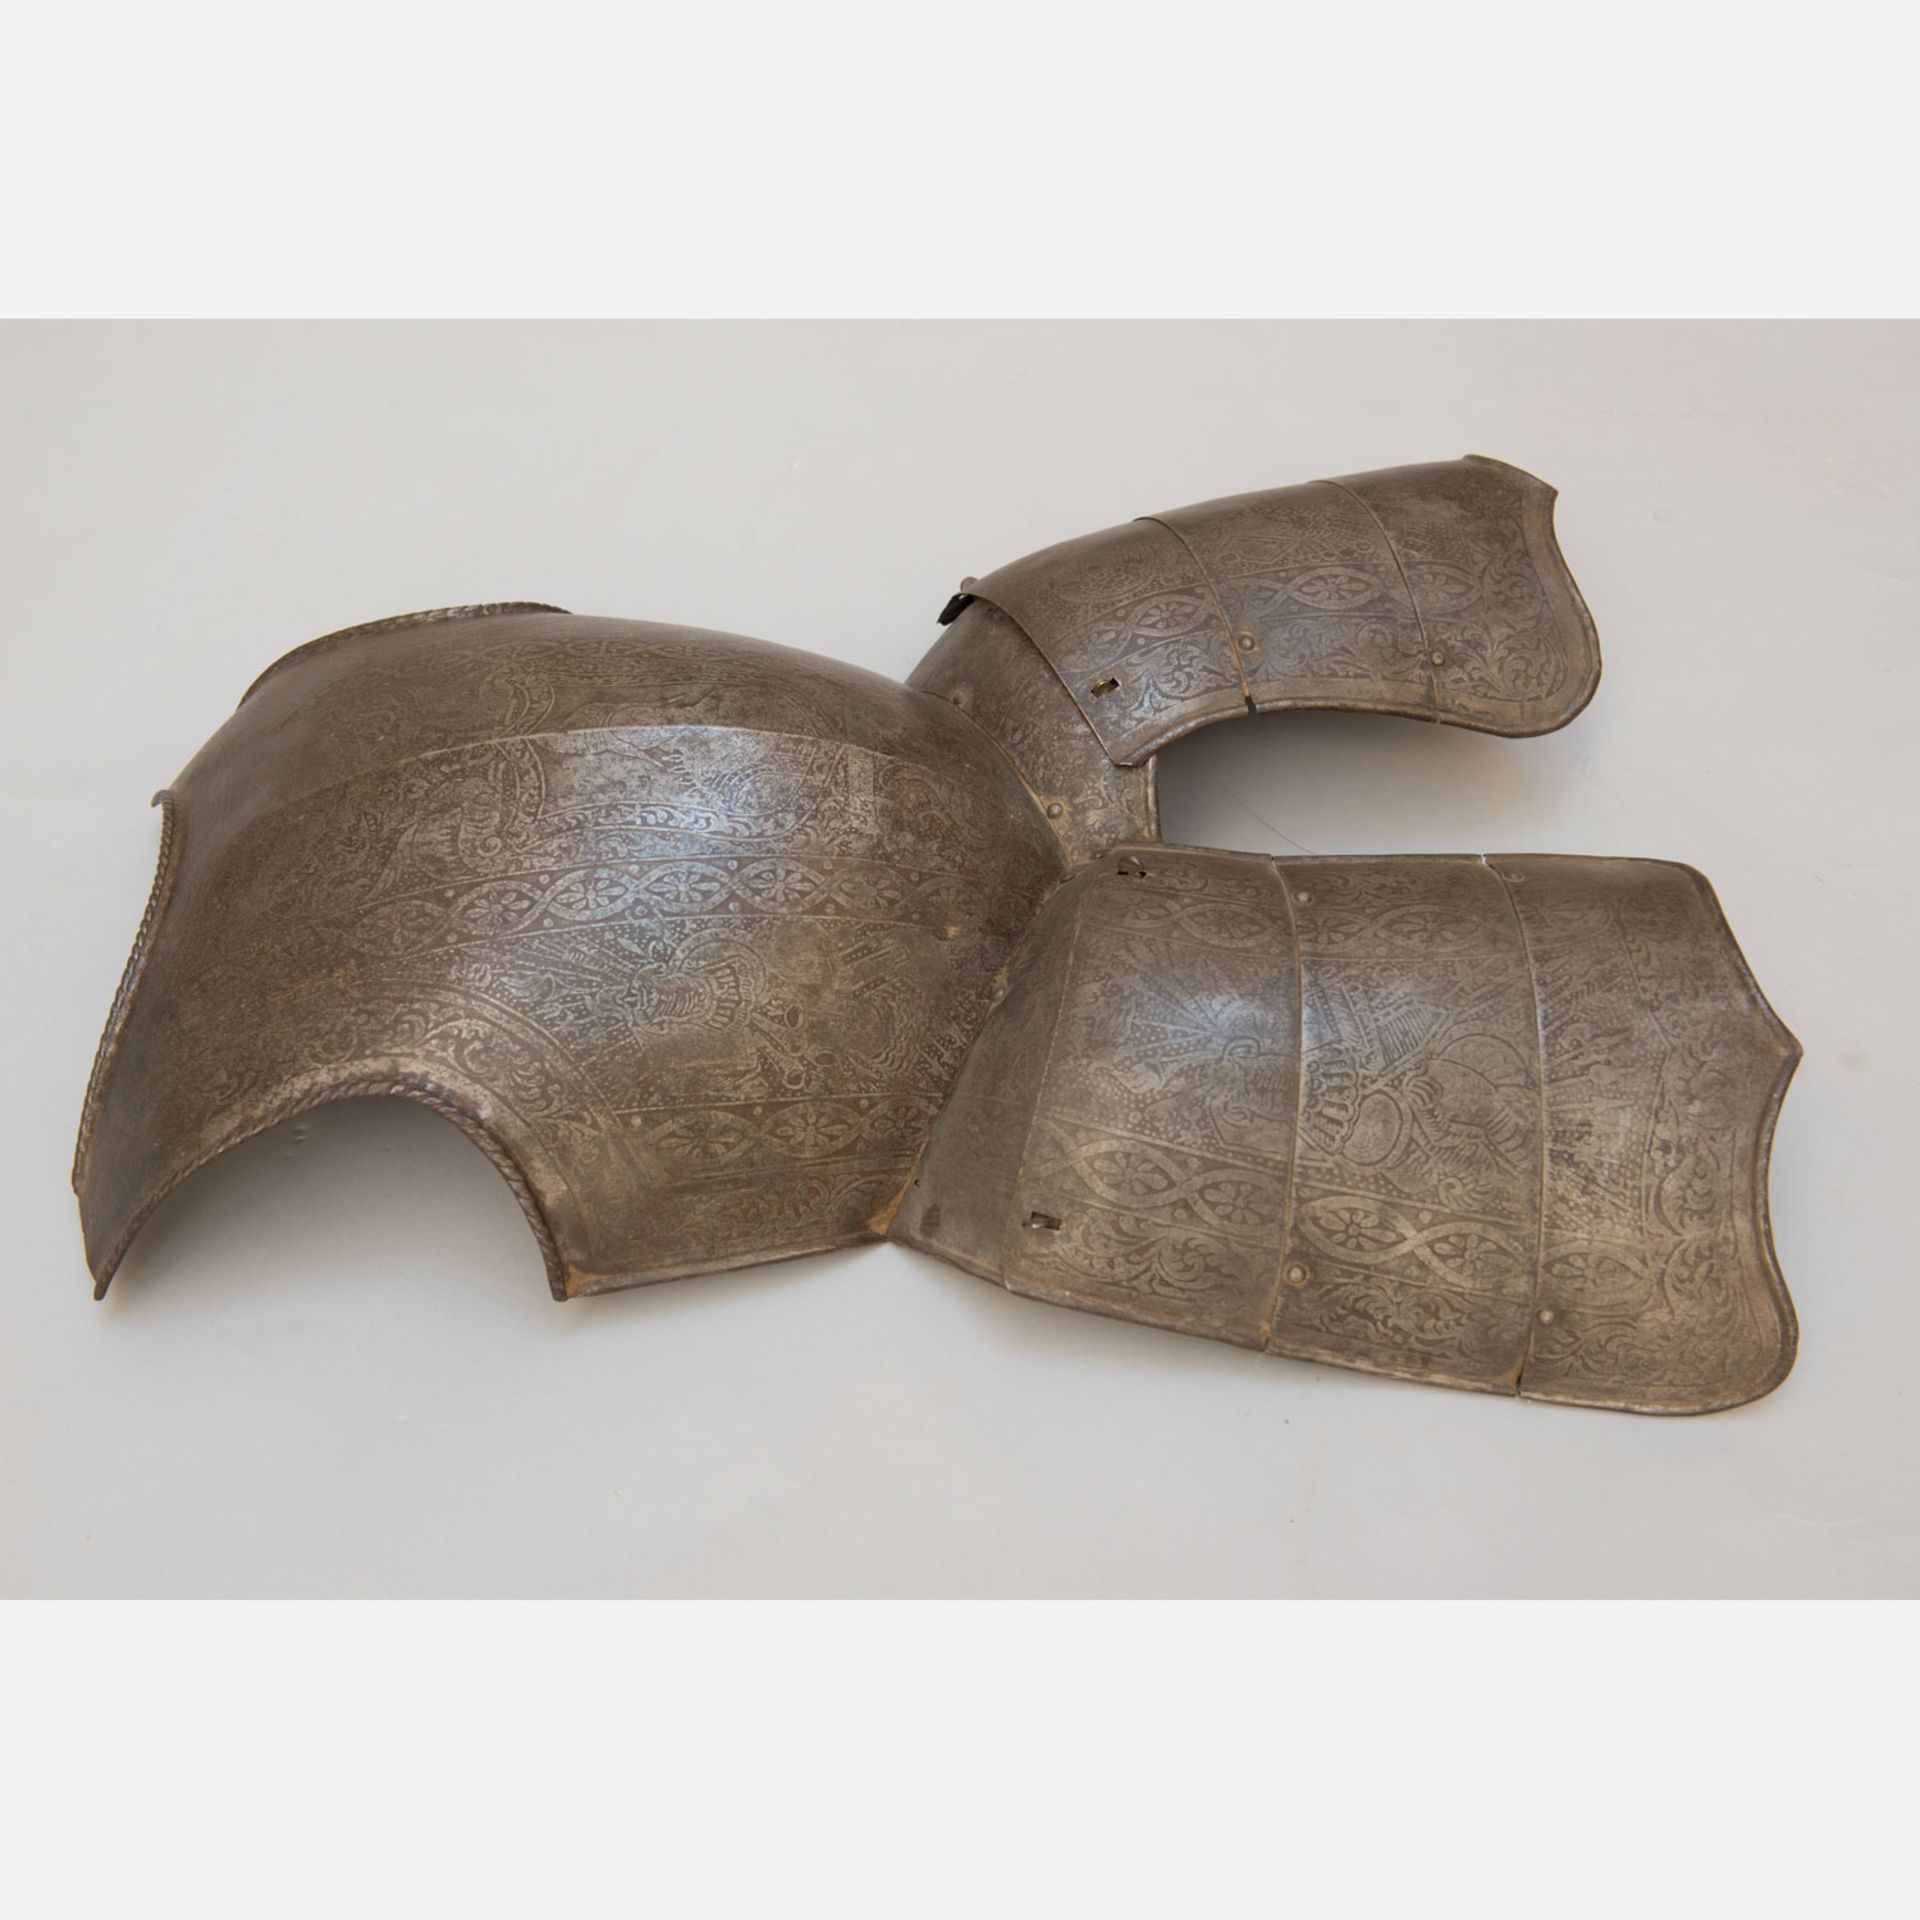 Breast and Knee Armour - Image 2 of 4